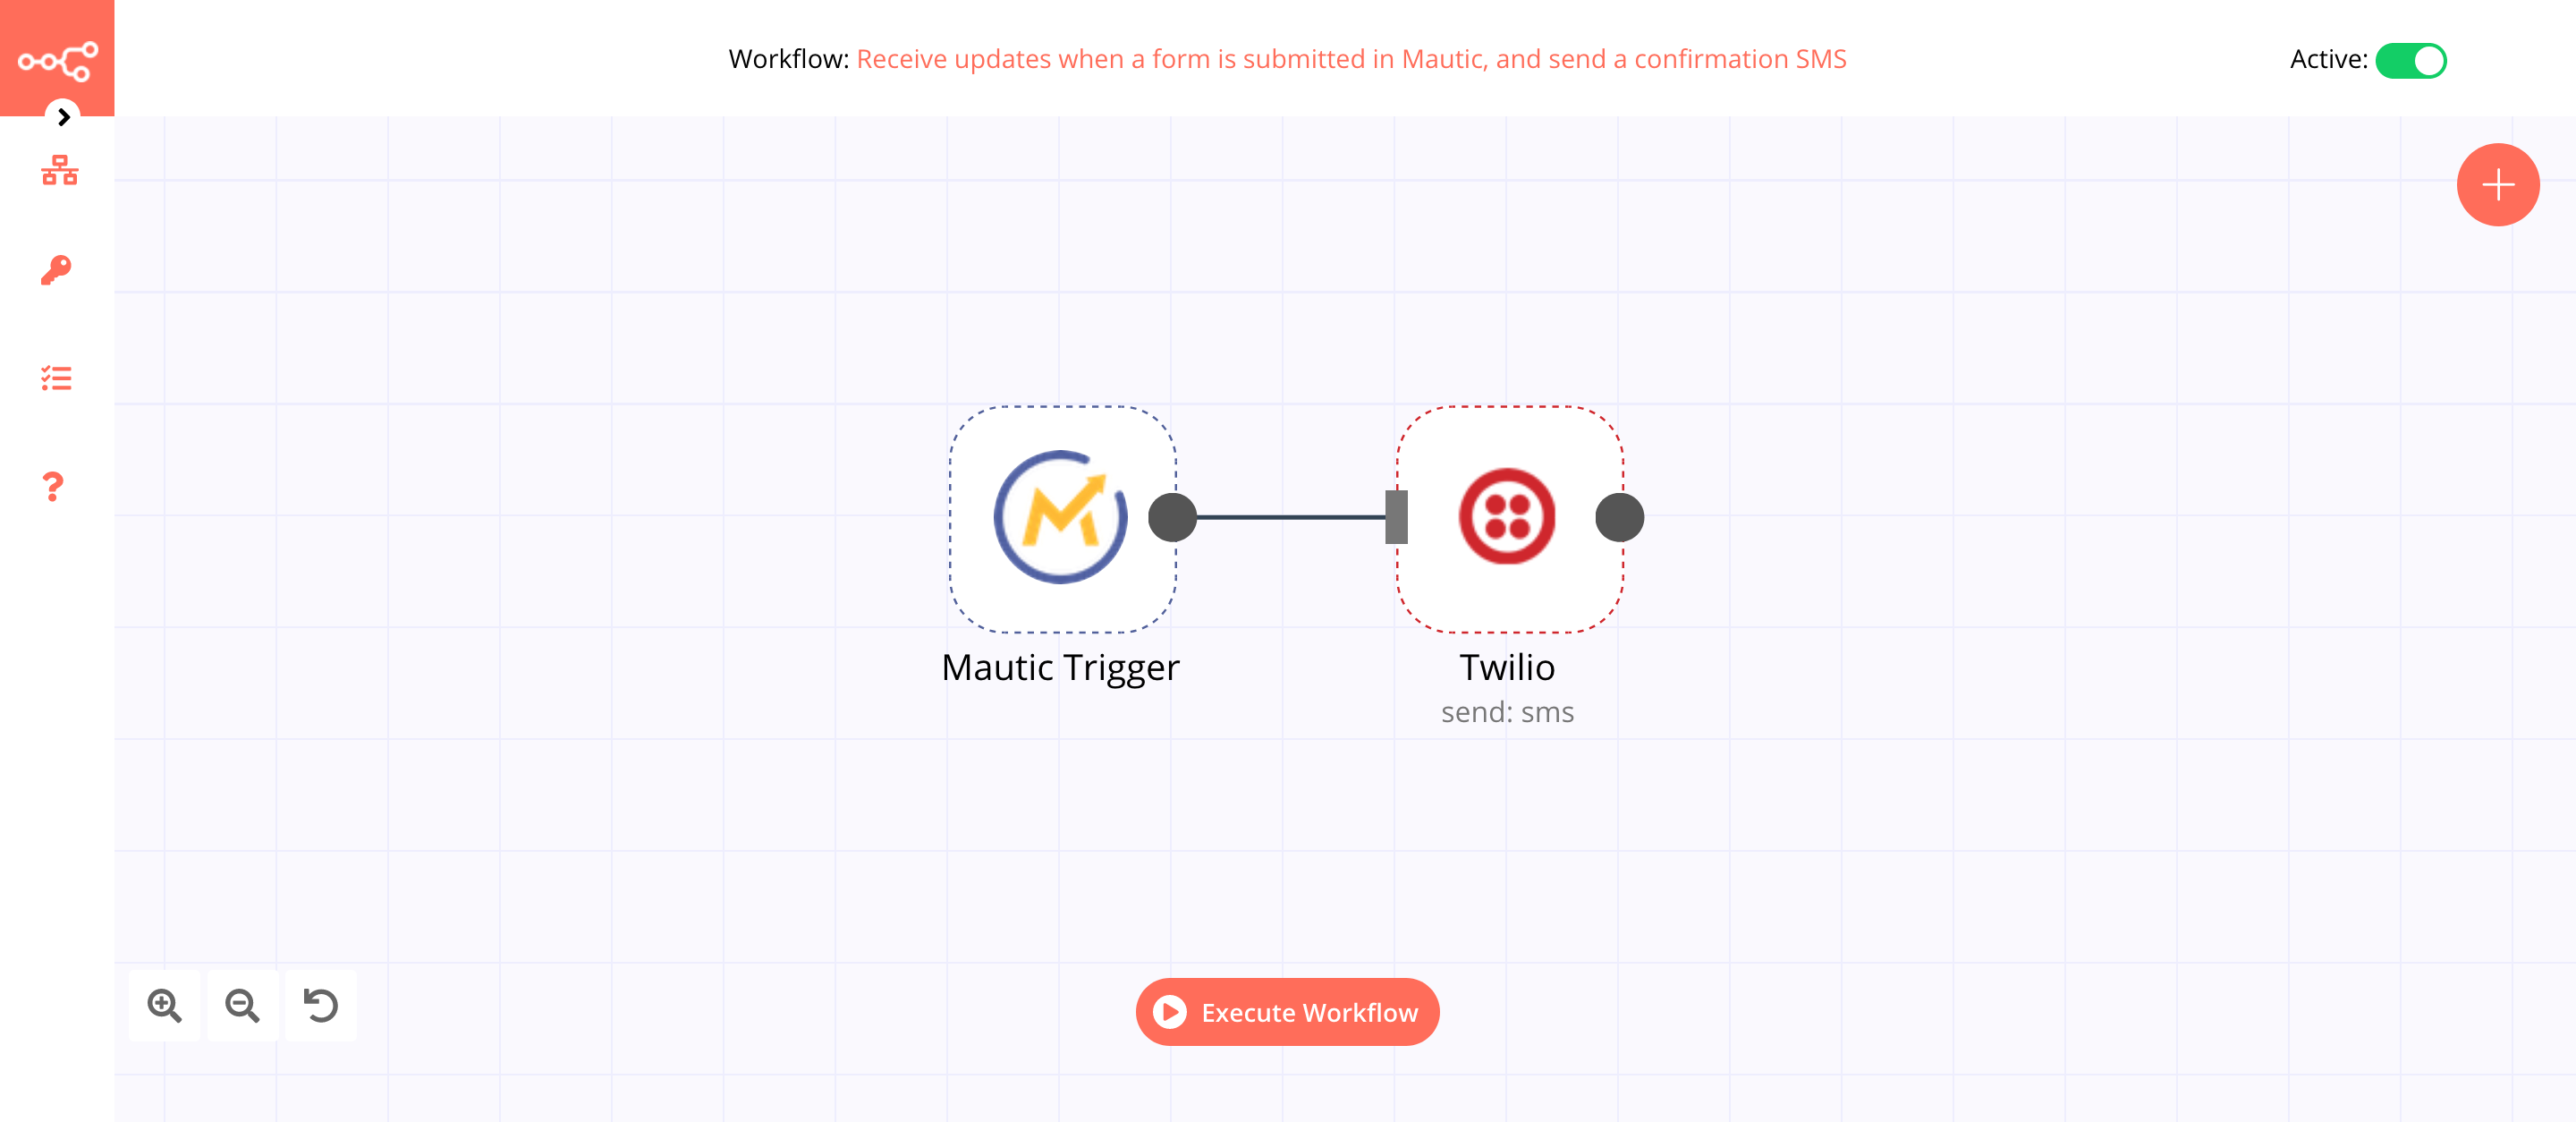 A workflow with the Mautic Trigger node